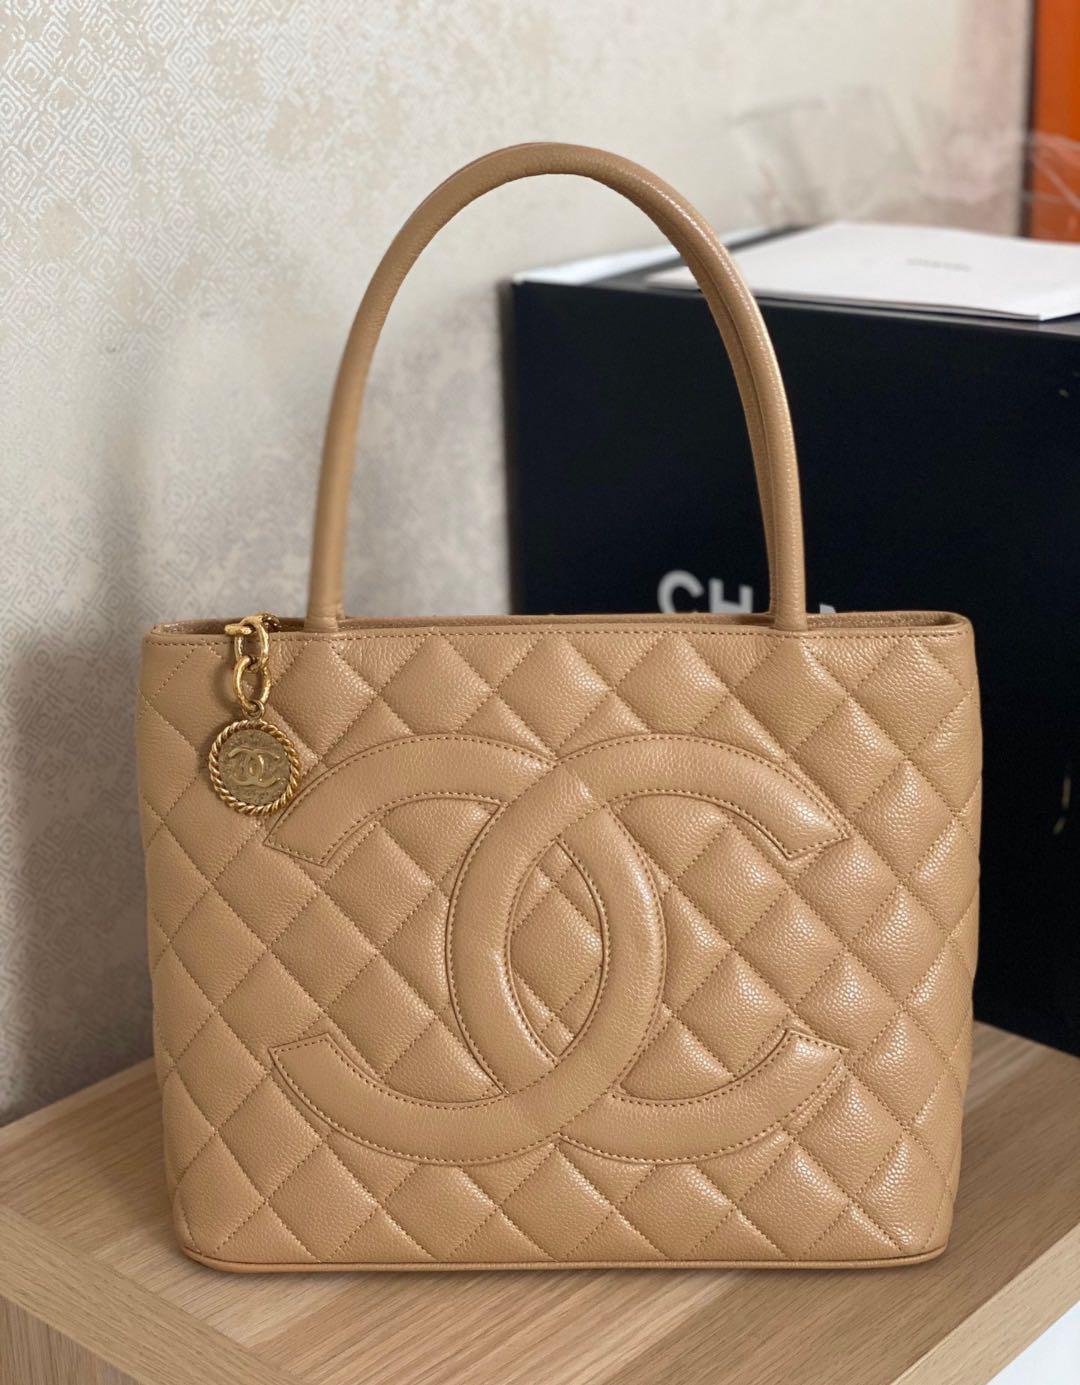 Chanel Medallion Tote Review 